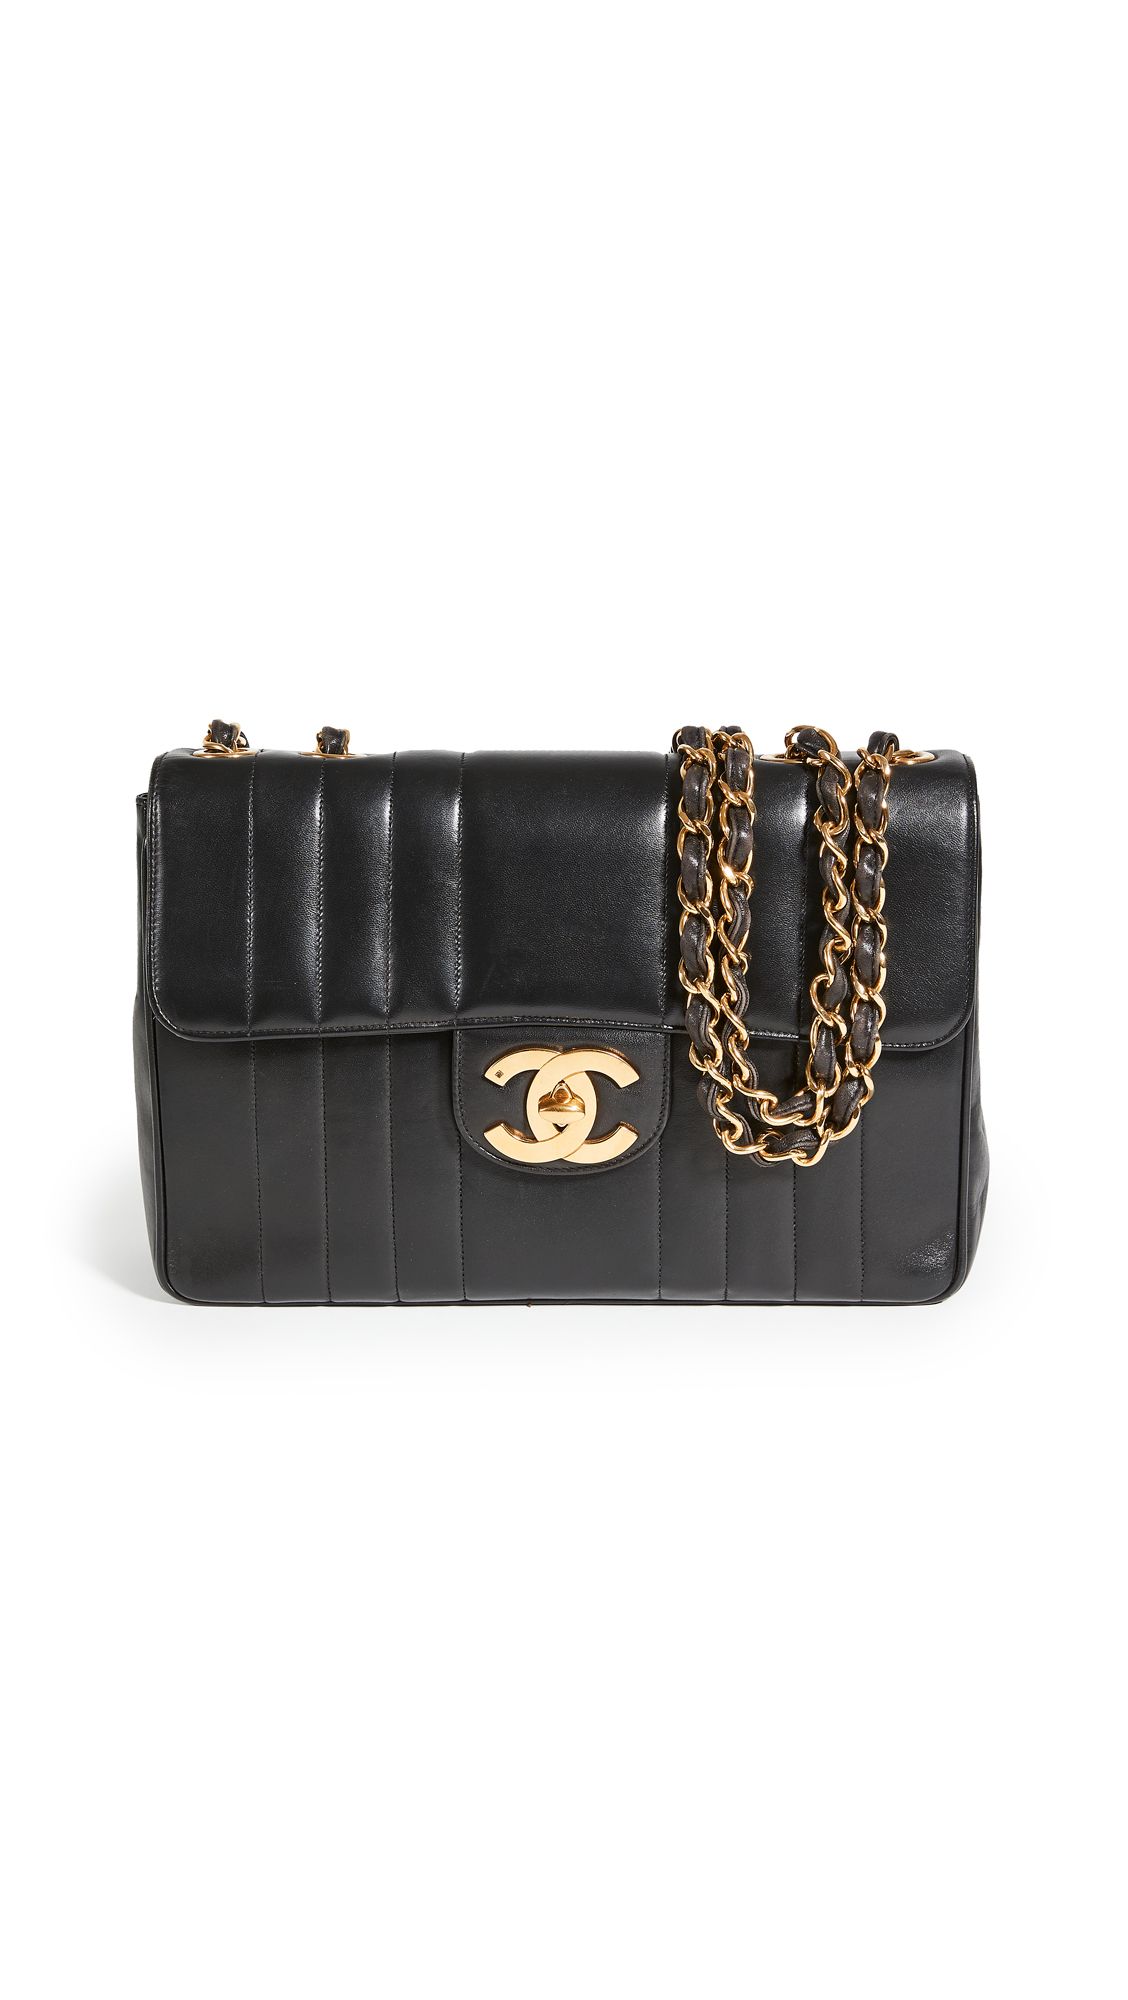 What Goes Around Comes Around Chanel Black Lambskin Vertical Flap Jumbo Bag | Shopbop